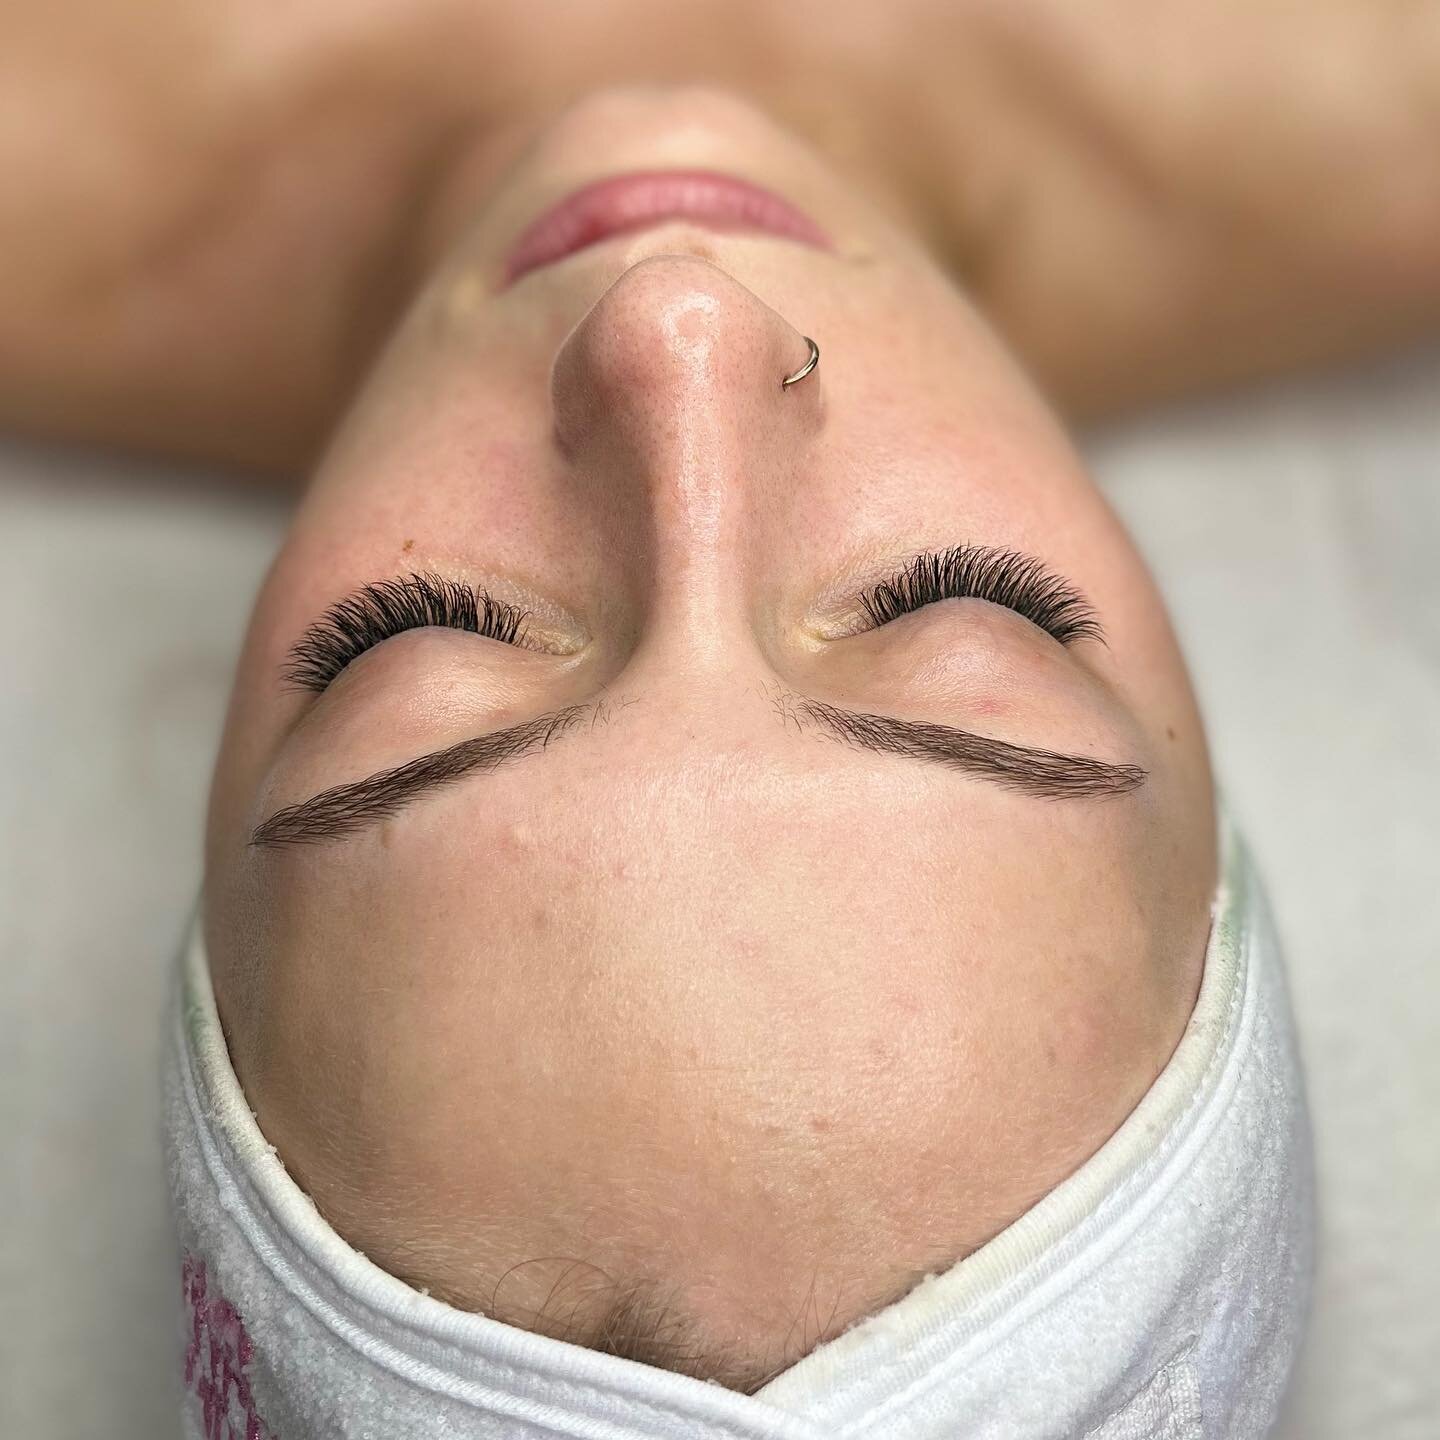 Swipe to see before 

Why Facials Should Be a Part of Your Skincare Routine

Improves Your Skin&rsquo;s Appearance

Provides a Deep Clean

Boosts Skin Youthfulness and Glow

Bye-Bye Stress

It&rsquo;s an Act of Self-Care 

Whether you get a facial on